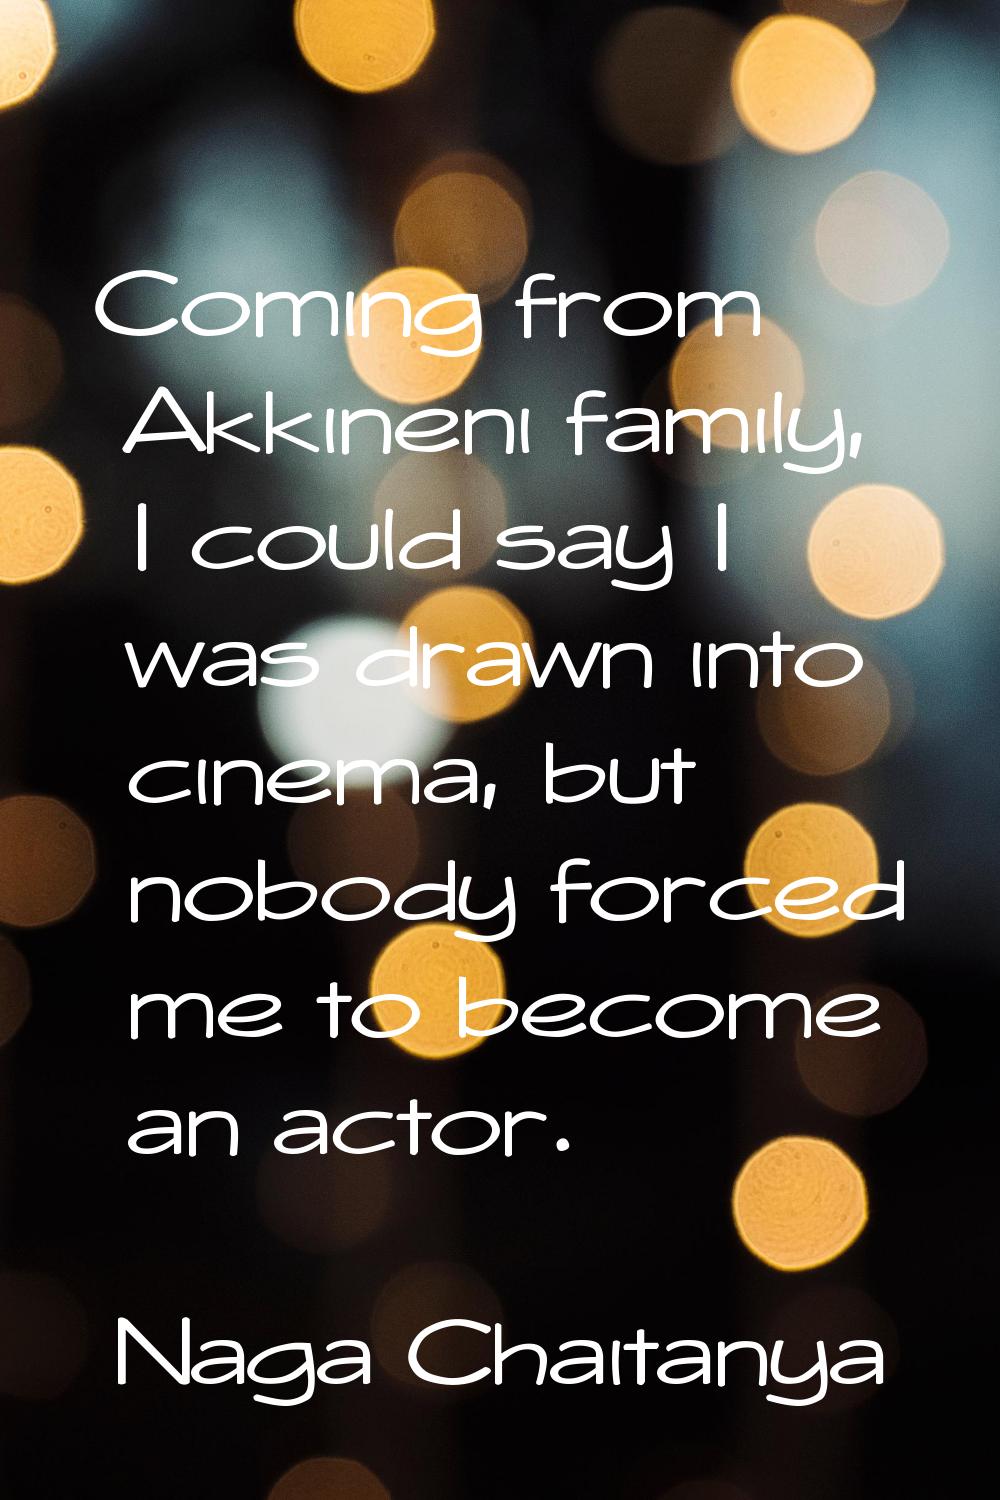 Coming from Akkineni family, I could say I was drawn into cinema, but nobody forced me to become an